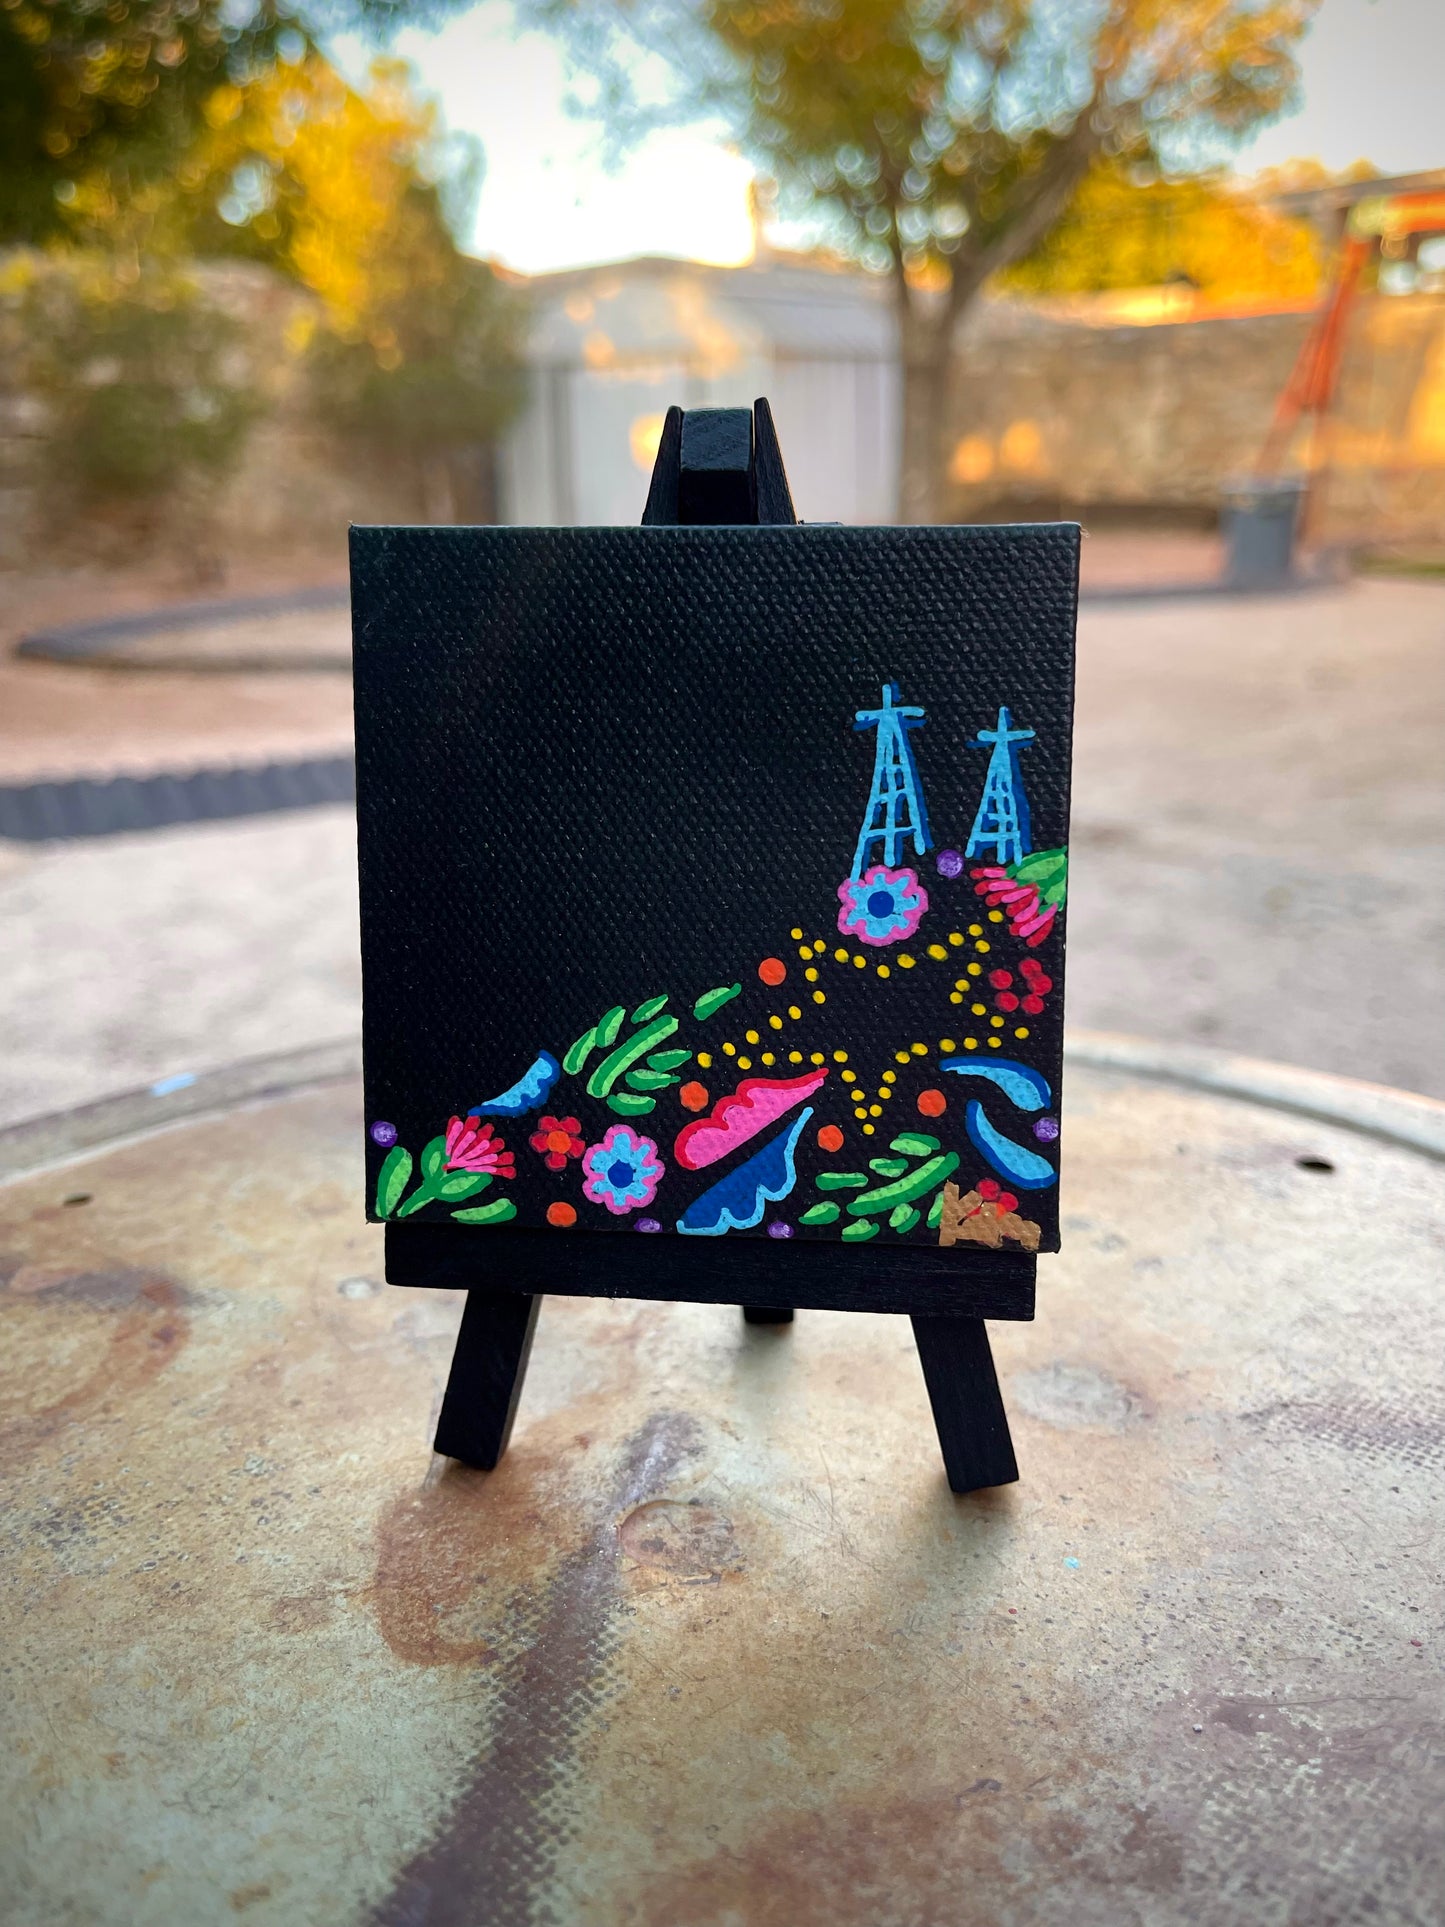 Heritage Mini Painting on Stretched Canvas with Wooden Easel